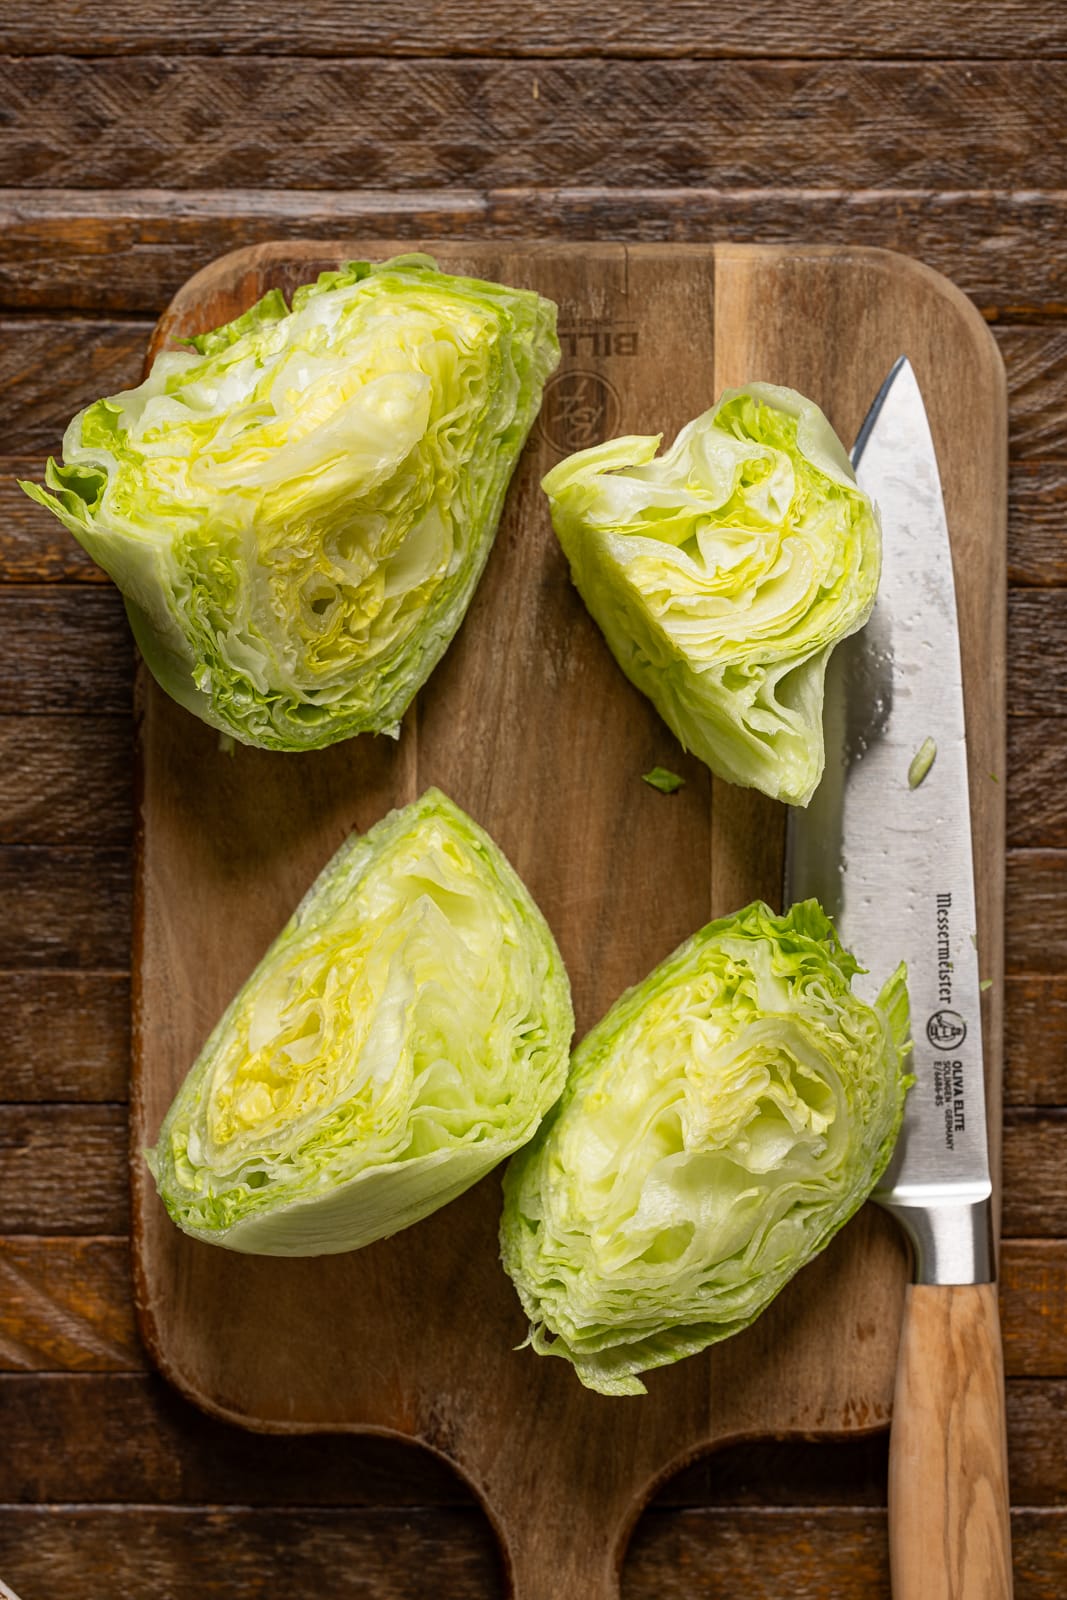 Chopped lettuce wedges on a cutting board with a knife.